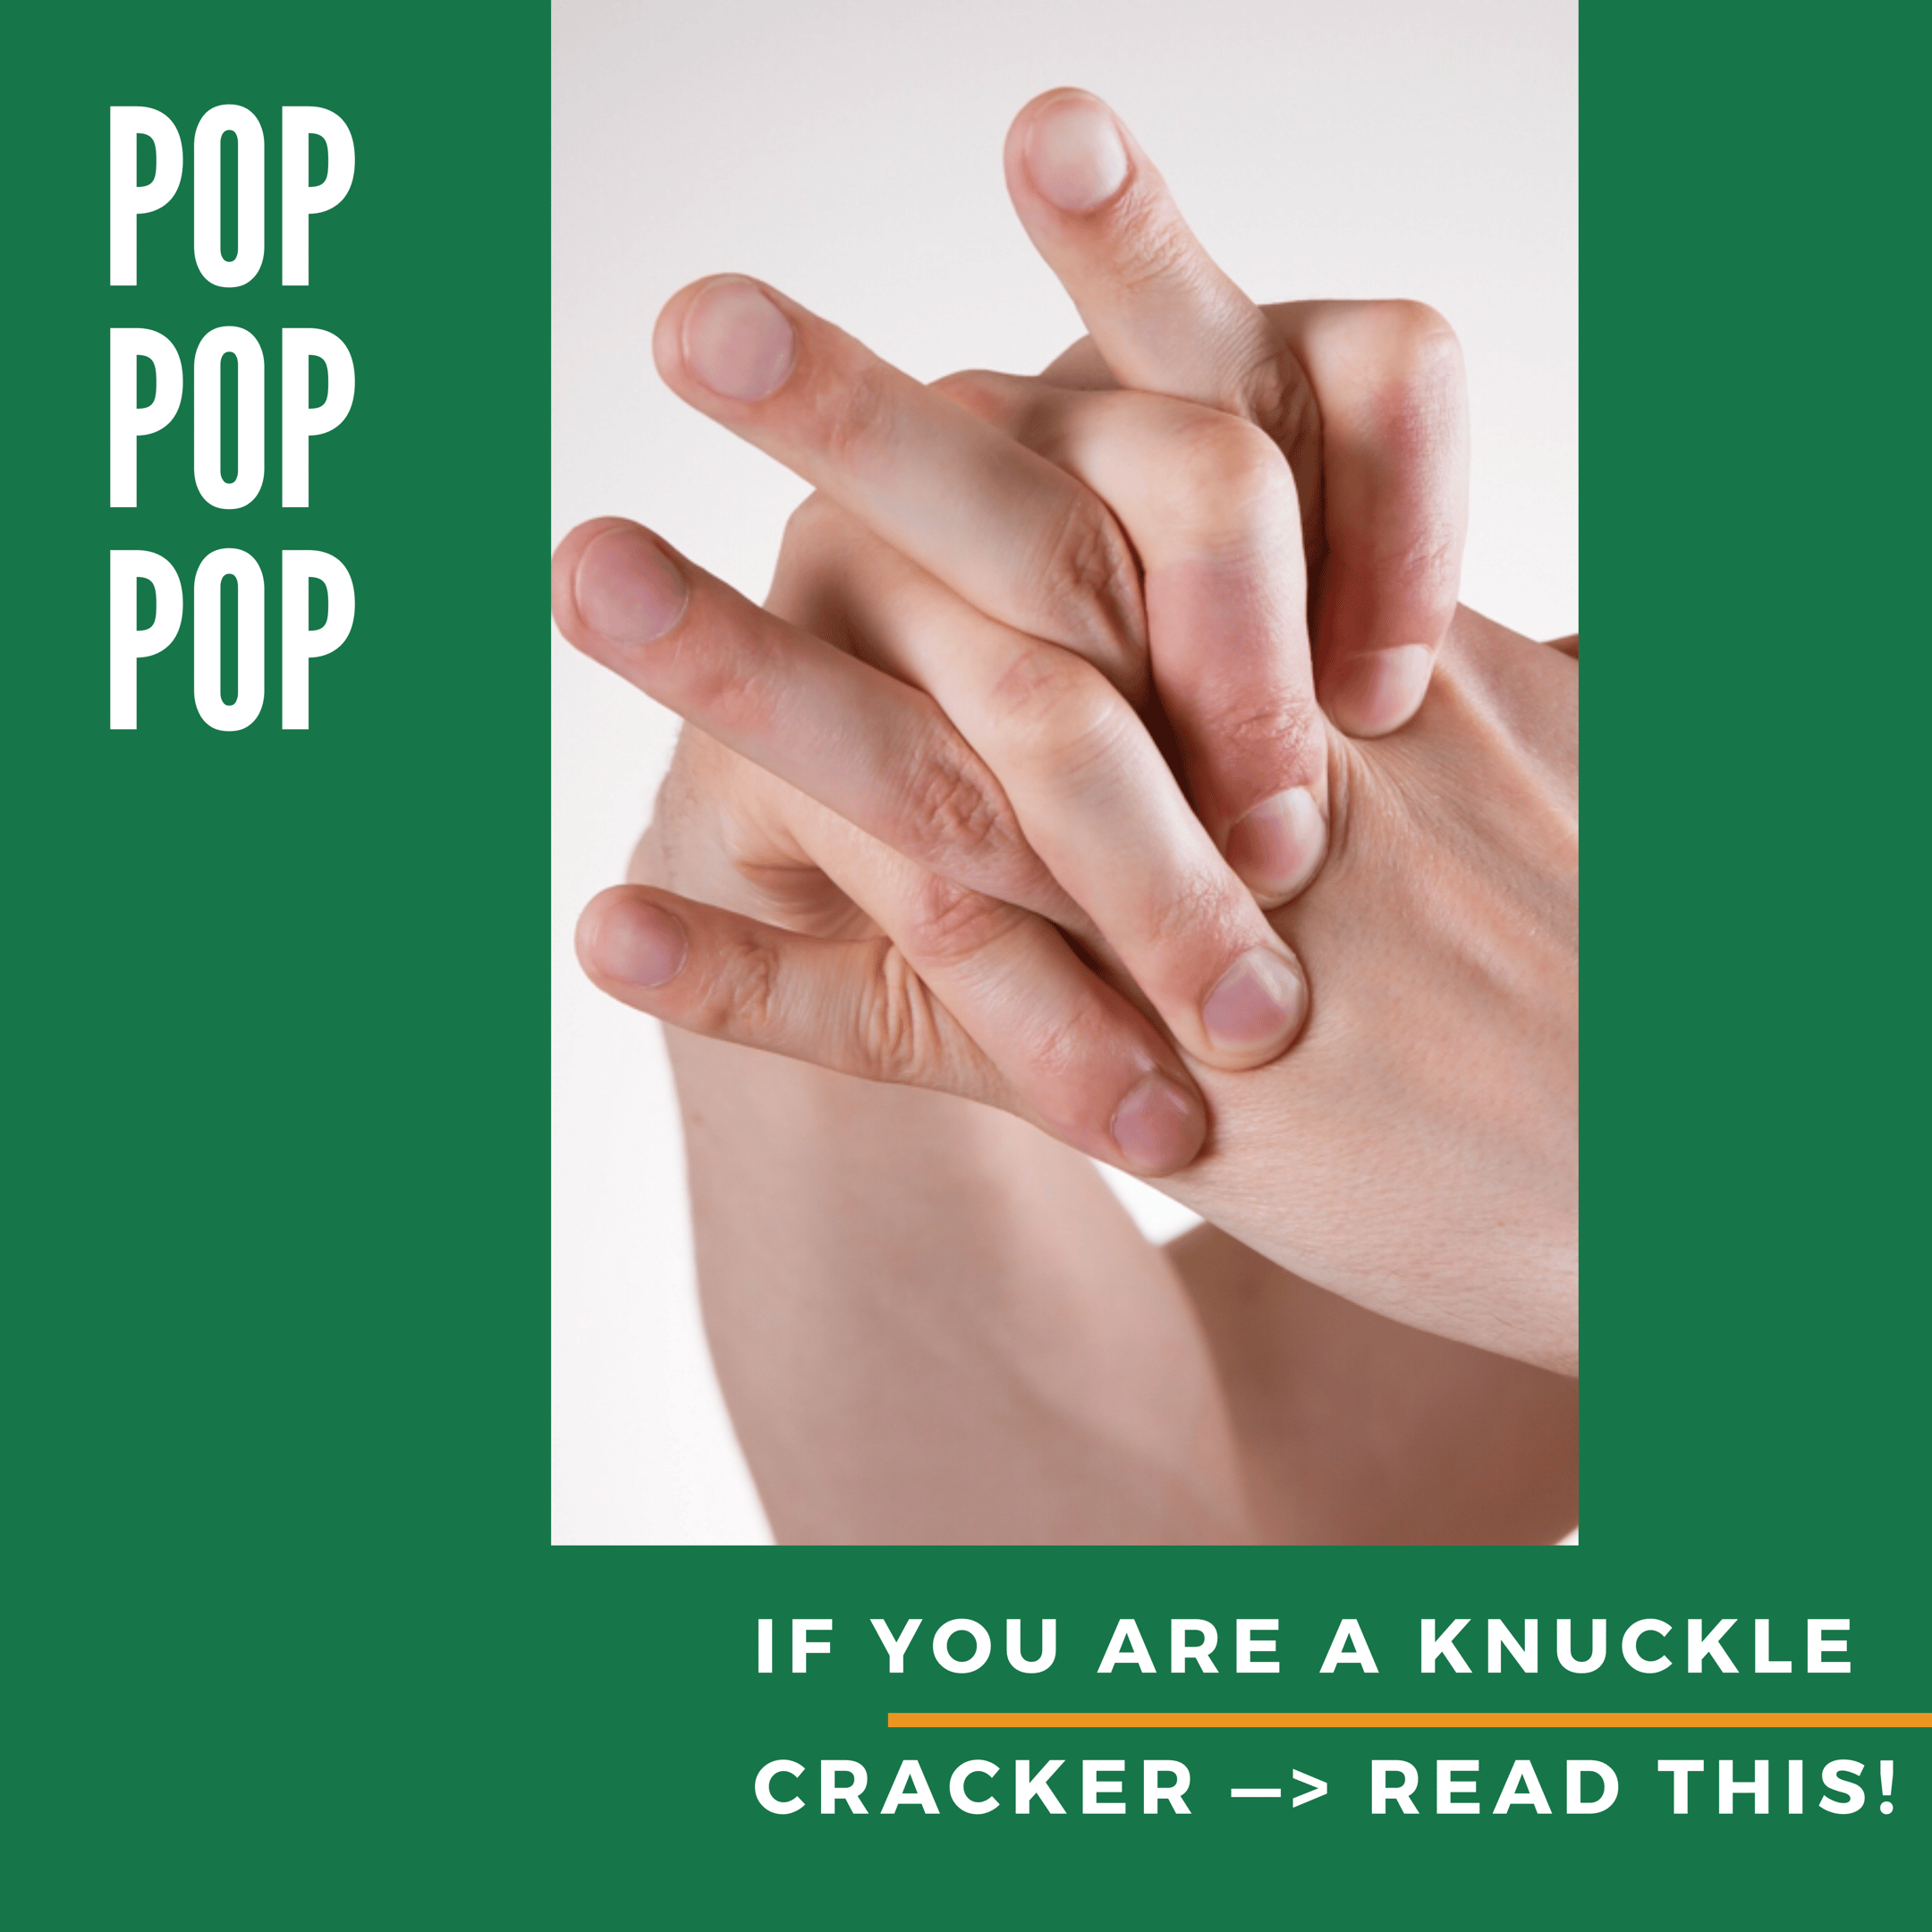 Are You A Knuckle Popper? Read This!